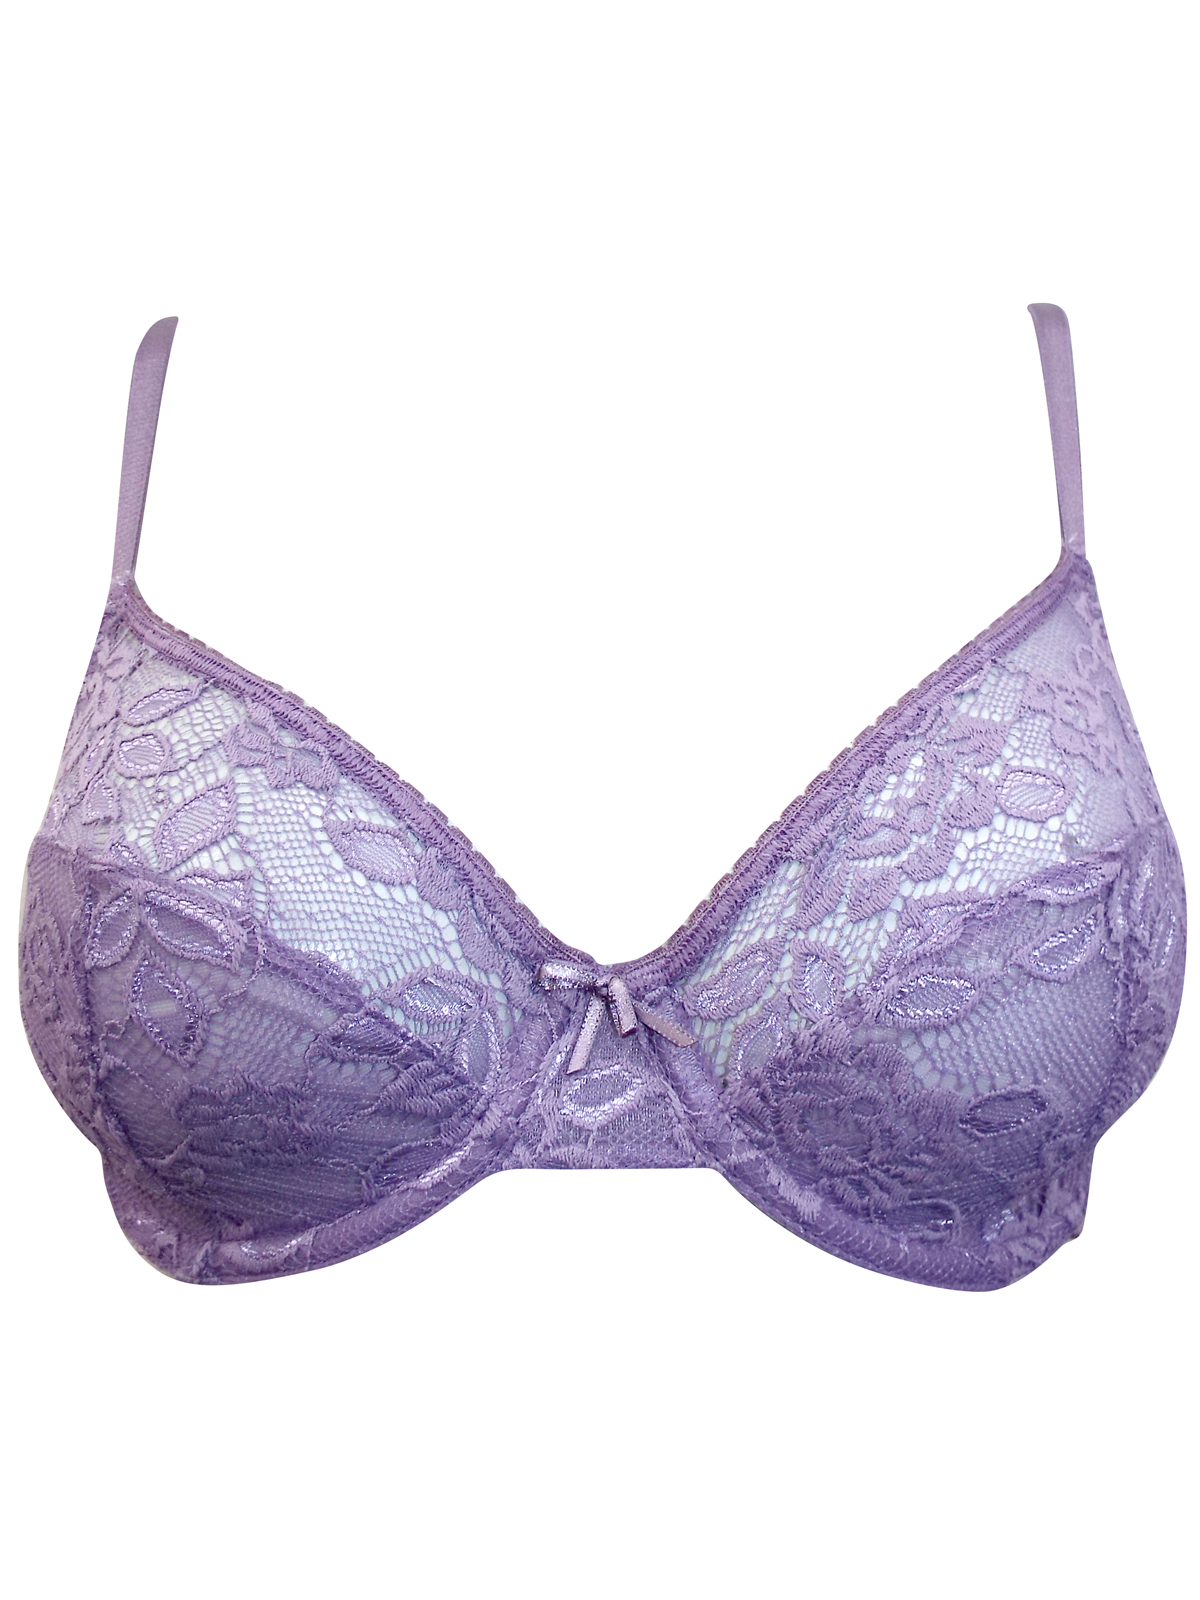 Size 32 to 42 BN M/&5 WHITE All Over Lace Underwired Full Cup Bras B-C-D